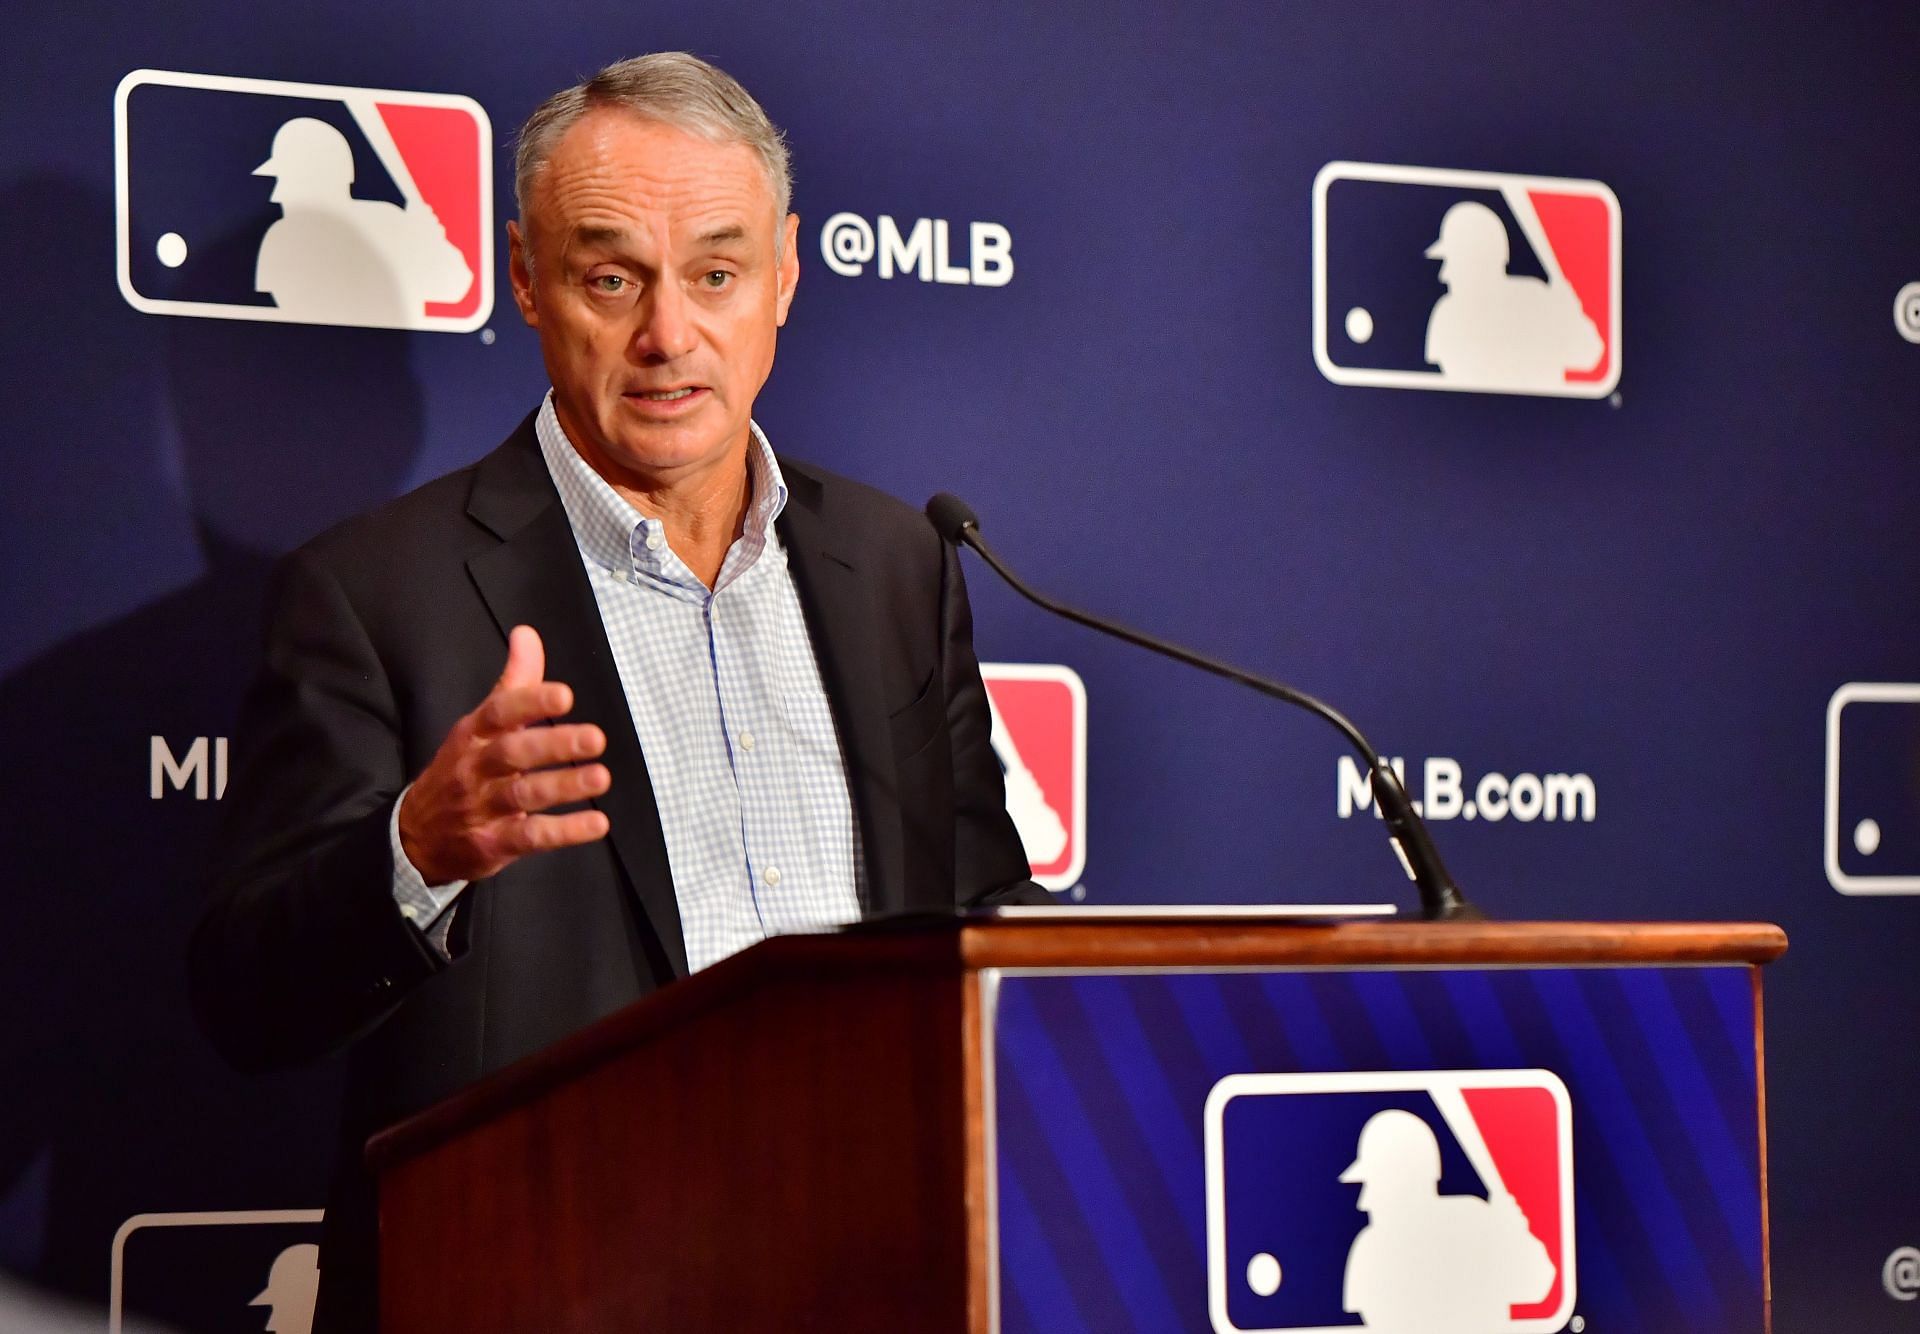 MLB Commissioner Rob Manfred during the MLB Owners Meetings.